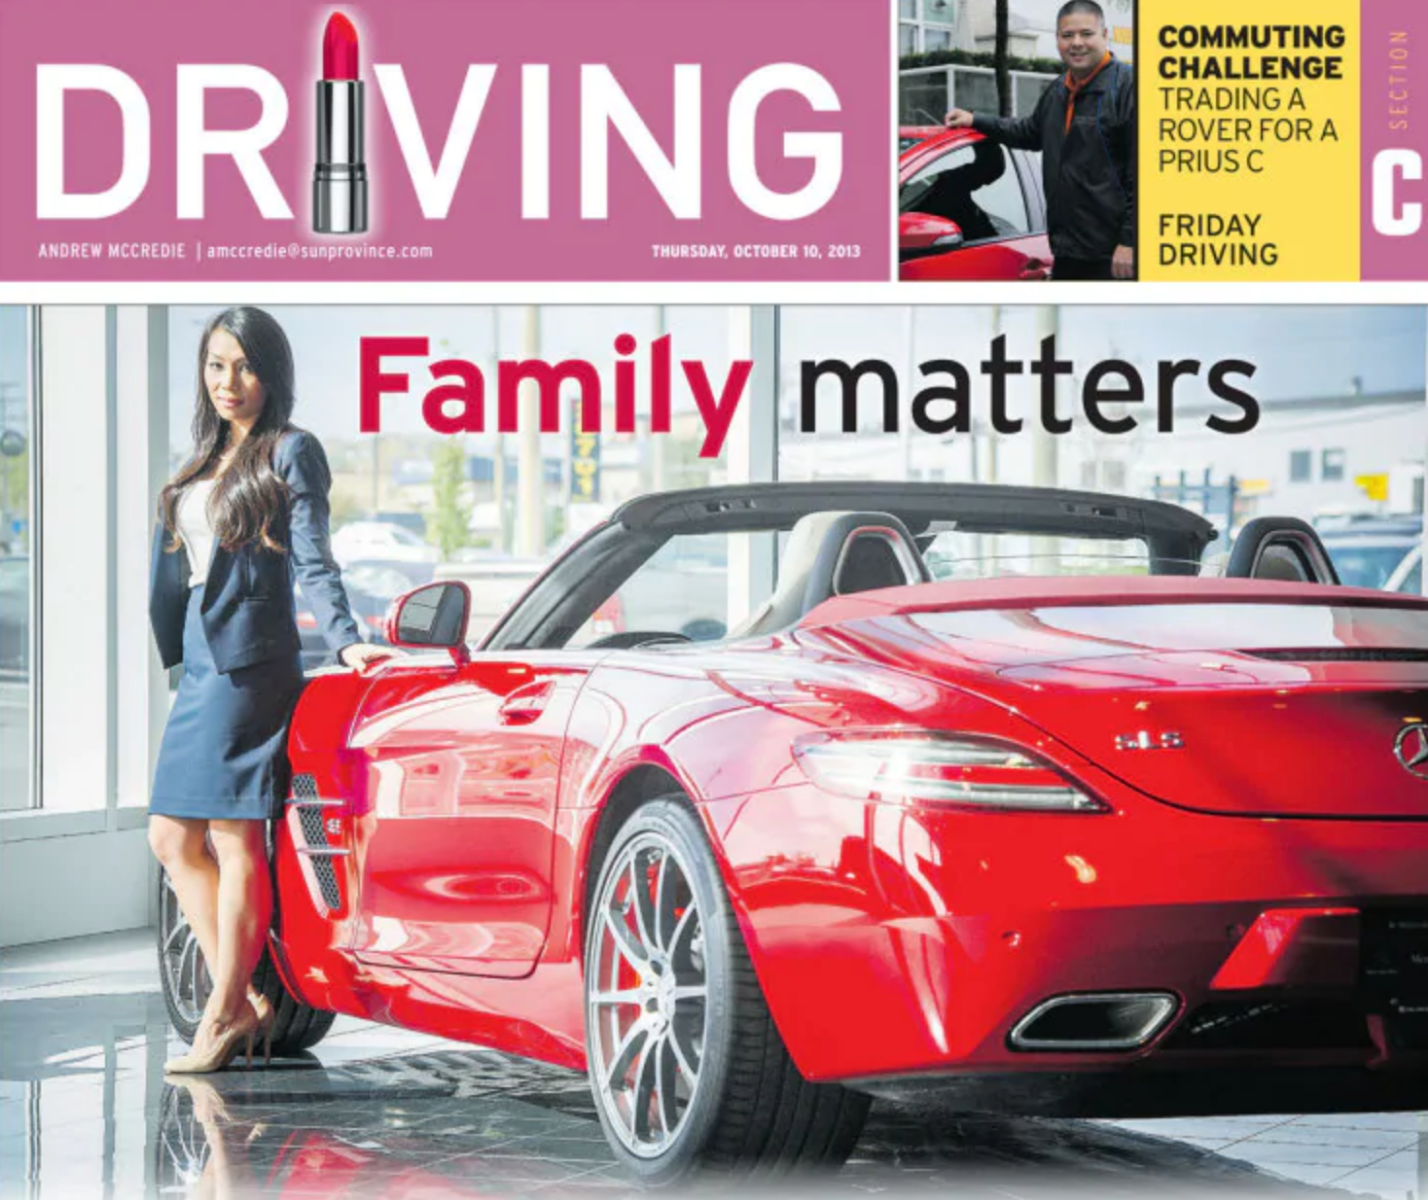 Cindy Nguyen, business manager for Mercedes-Benz Langley, featured in the Province Newspaper.